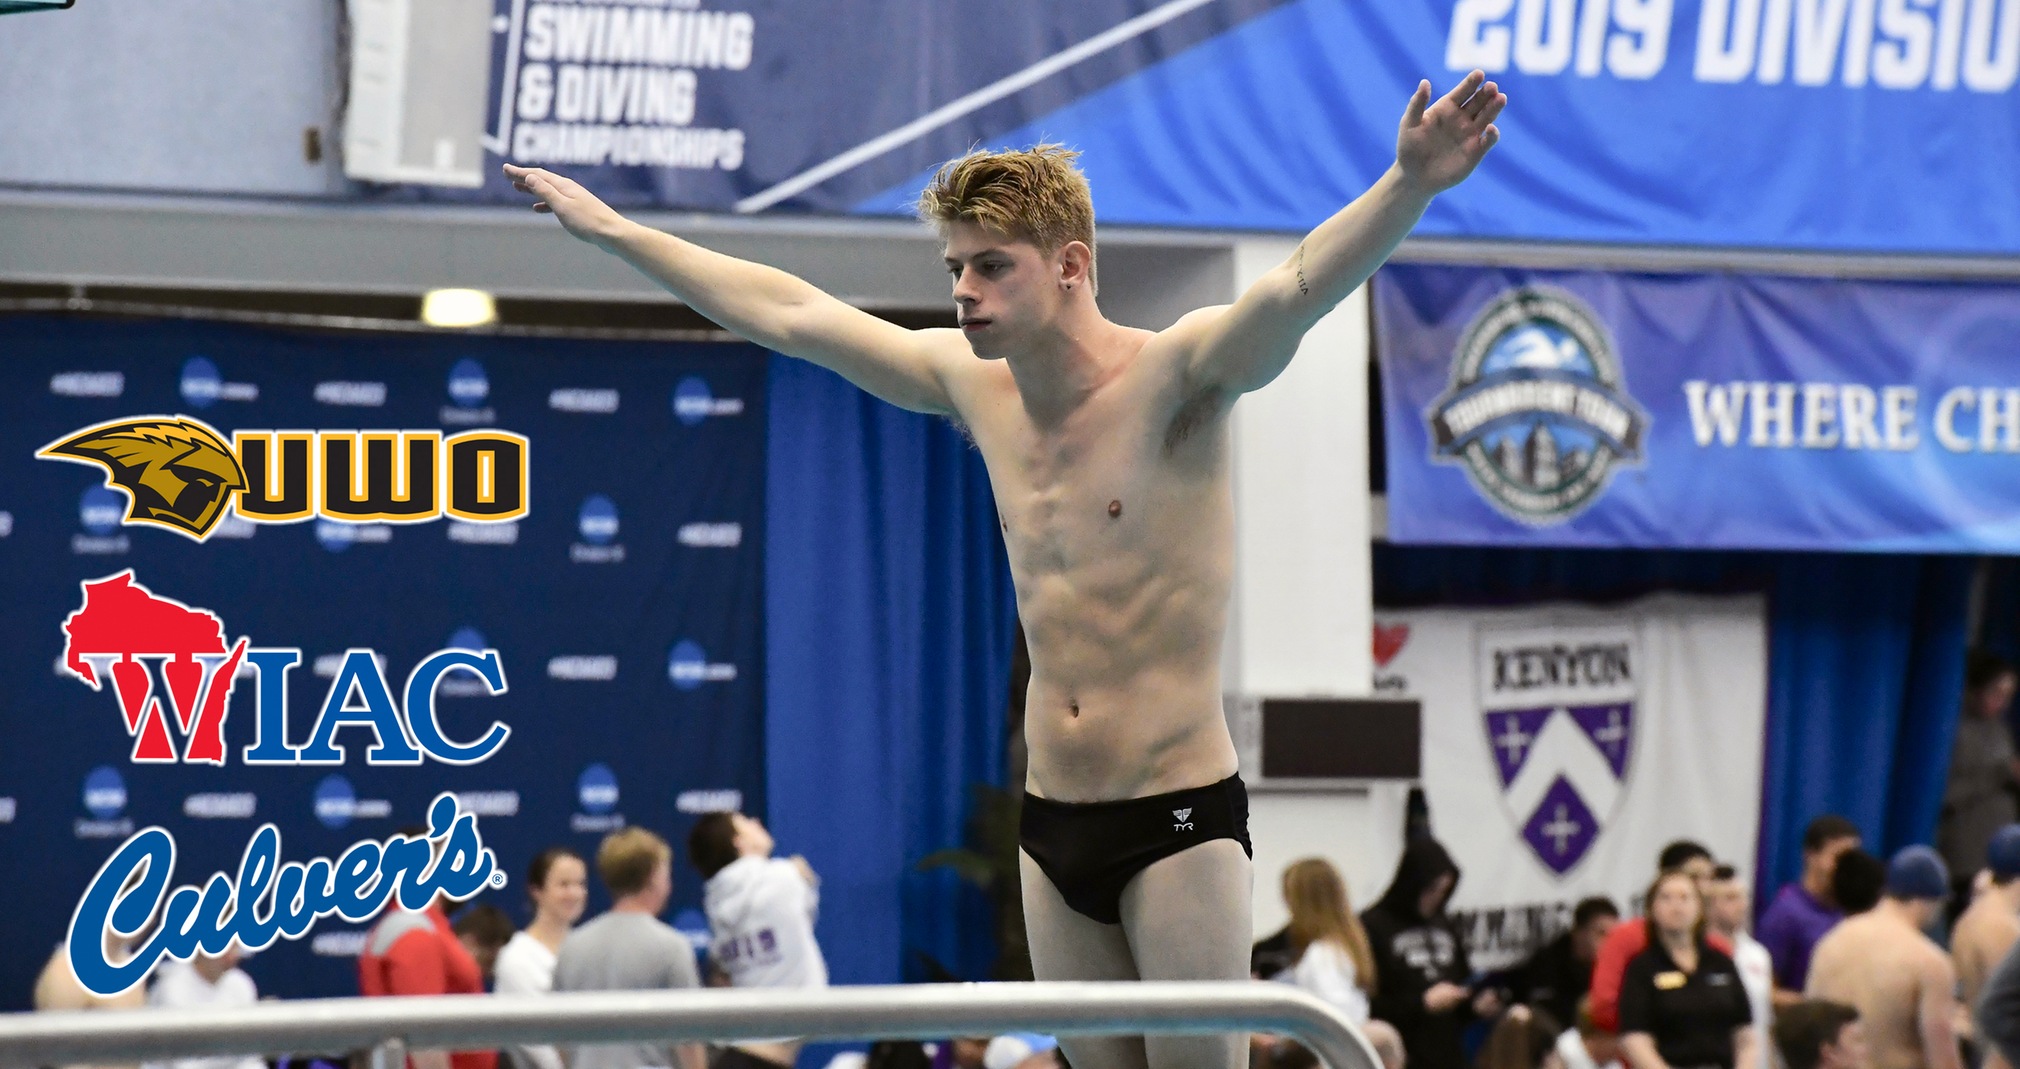 Matt Wilke finished 13th in the 3- and 16th in the 1-meter diving categories at the 2019 Division III Swimming & Diving Championship.